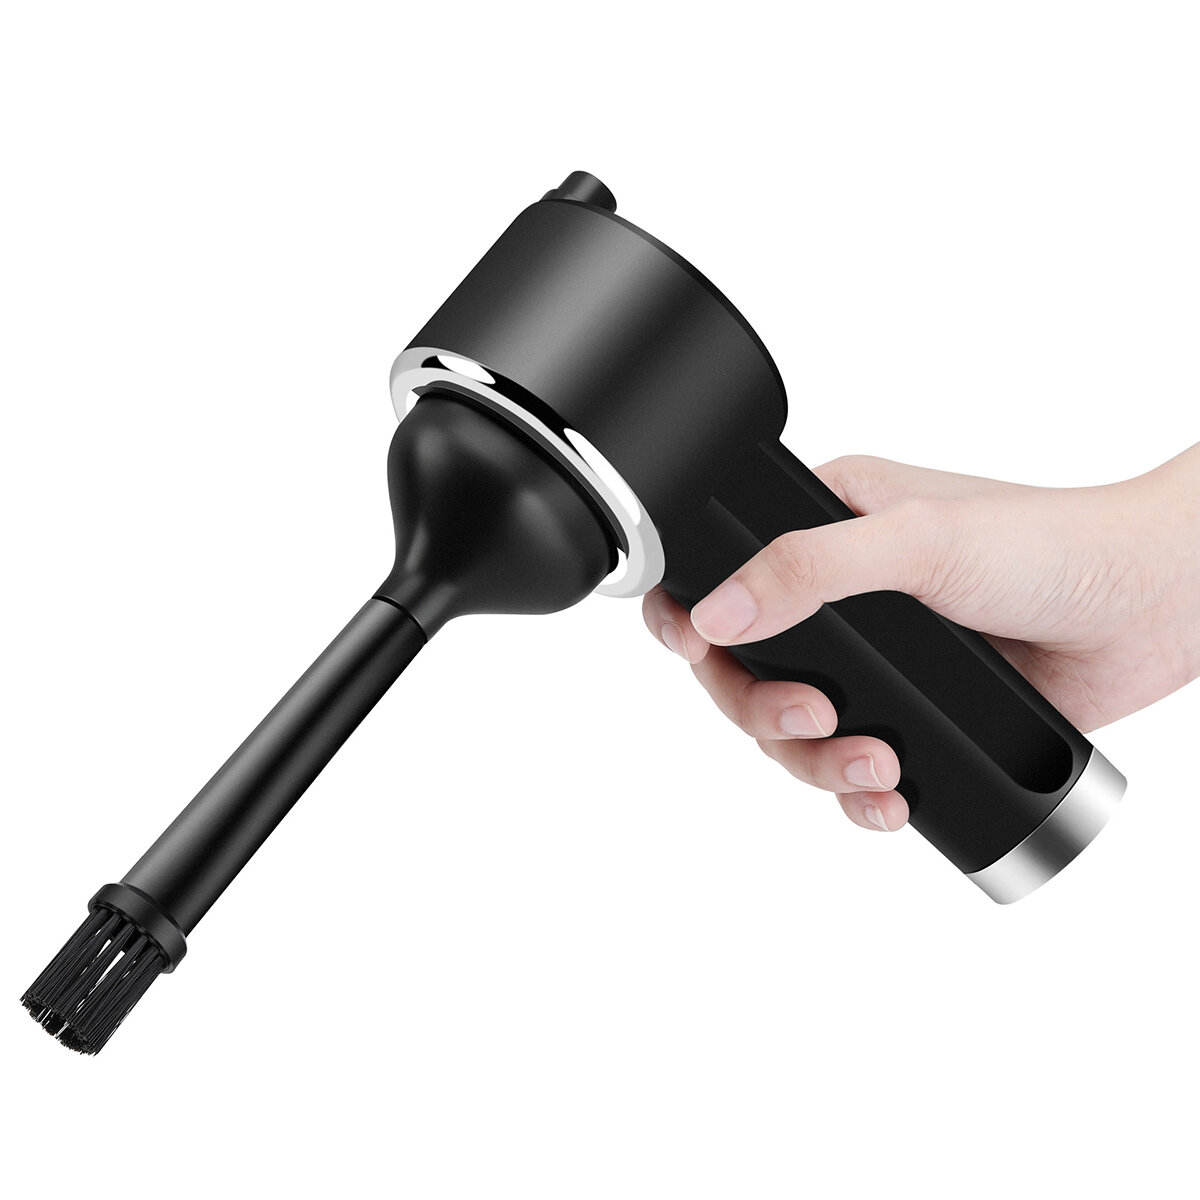 2 in 1 Cordless Electric Air Duster USB Vacuum Cleaner 2 Gear 5000Pa Powerful Suction Dust Collector 6000mAh Home Car Cl